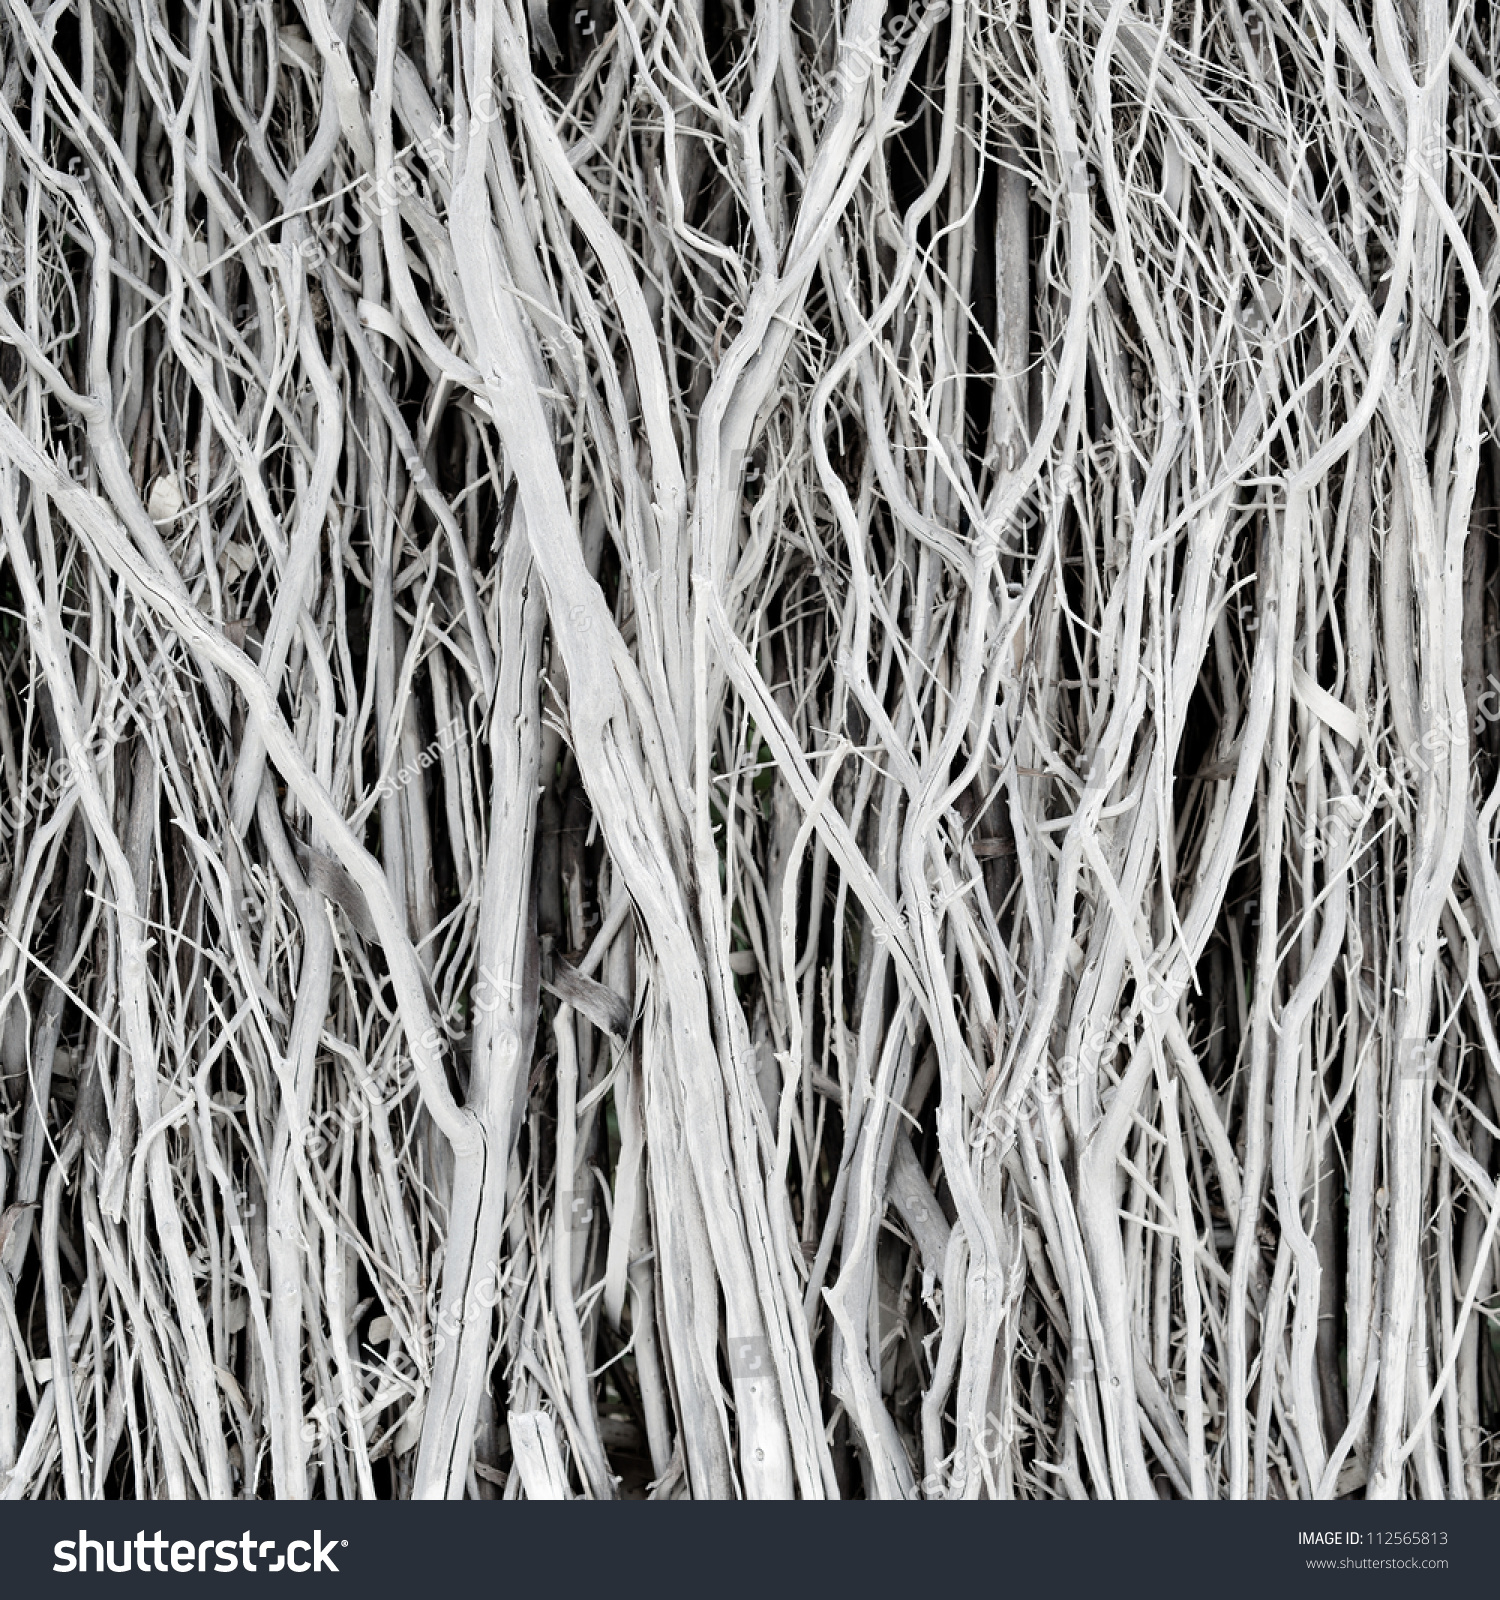 Dried Twigs Branches Striped Wood Texture Stock Photo 112565813 ...